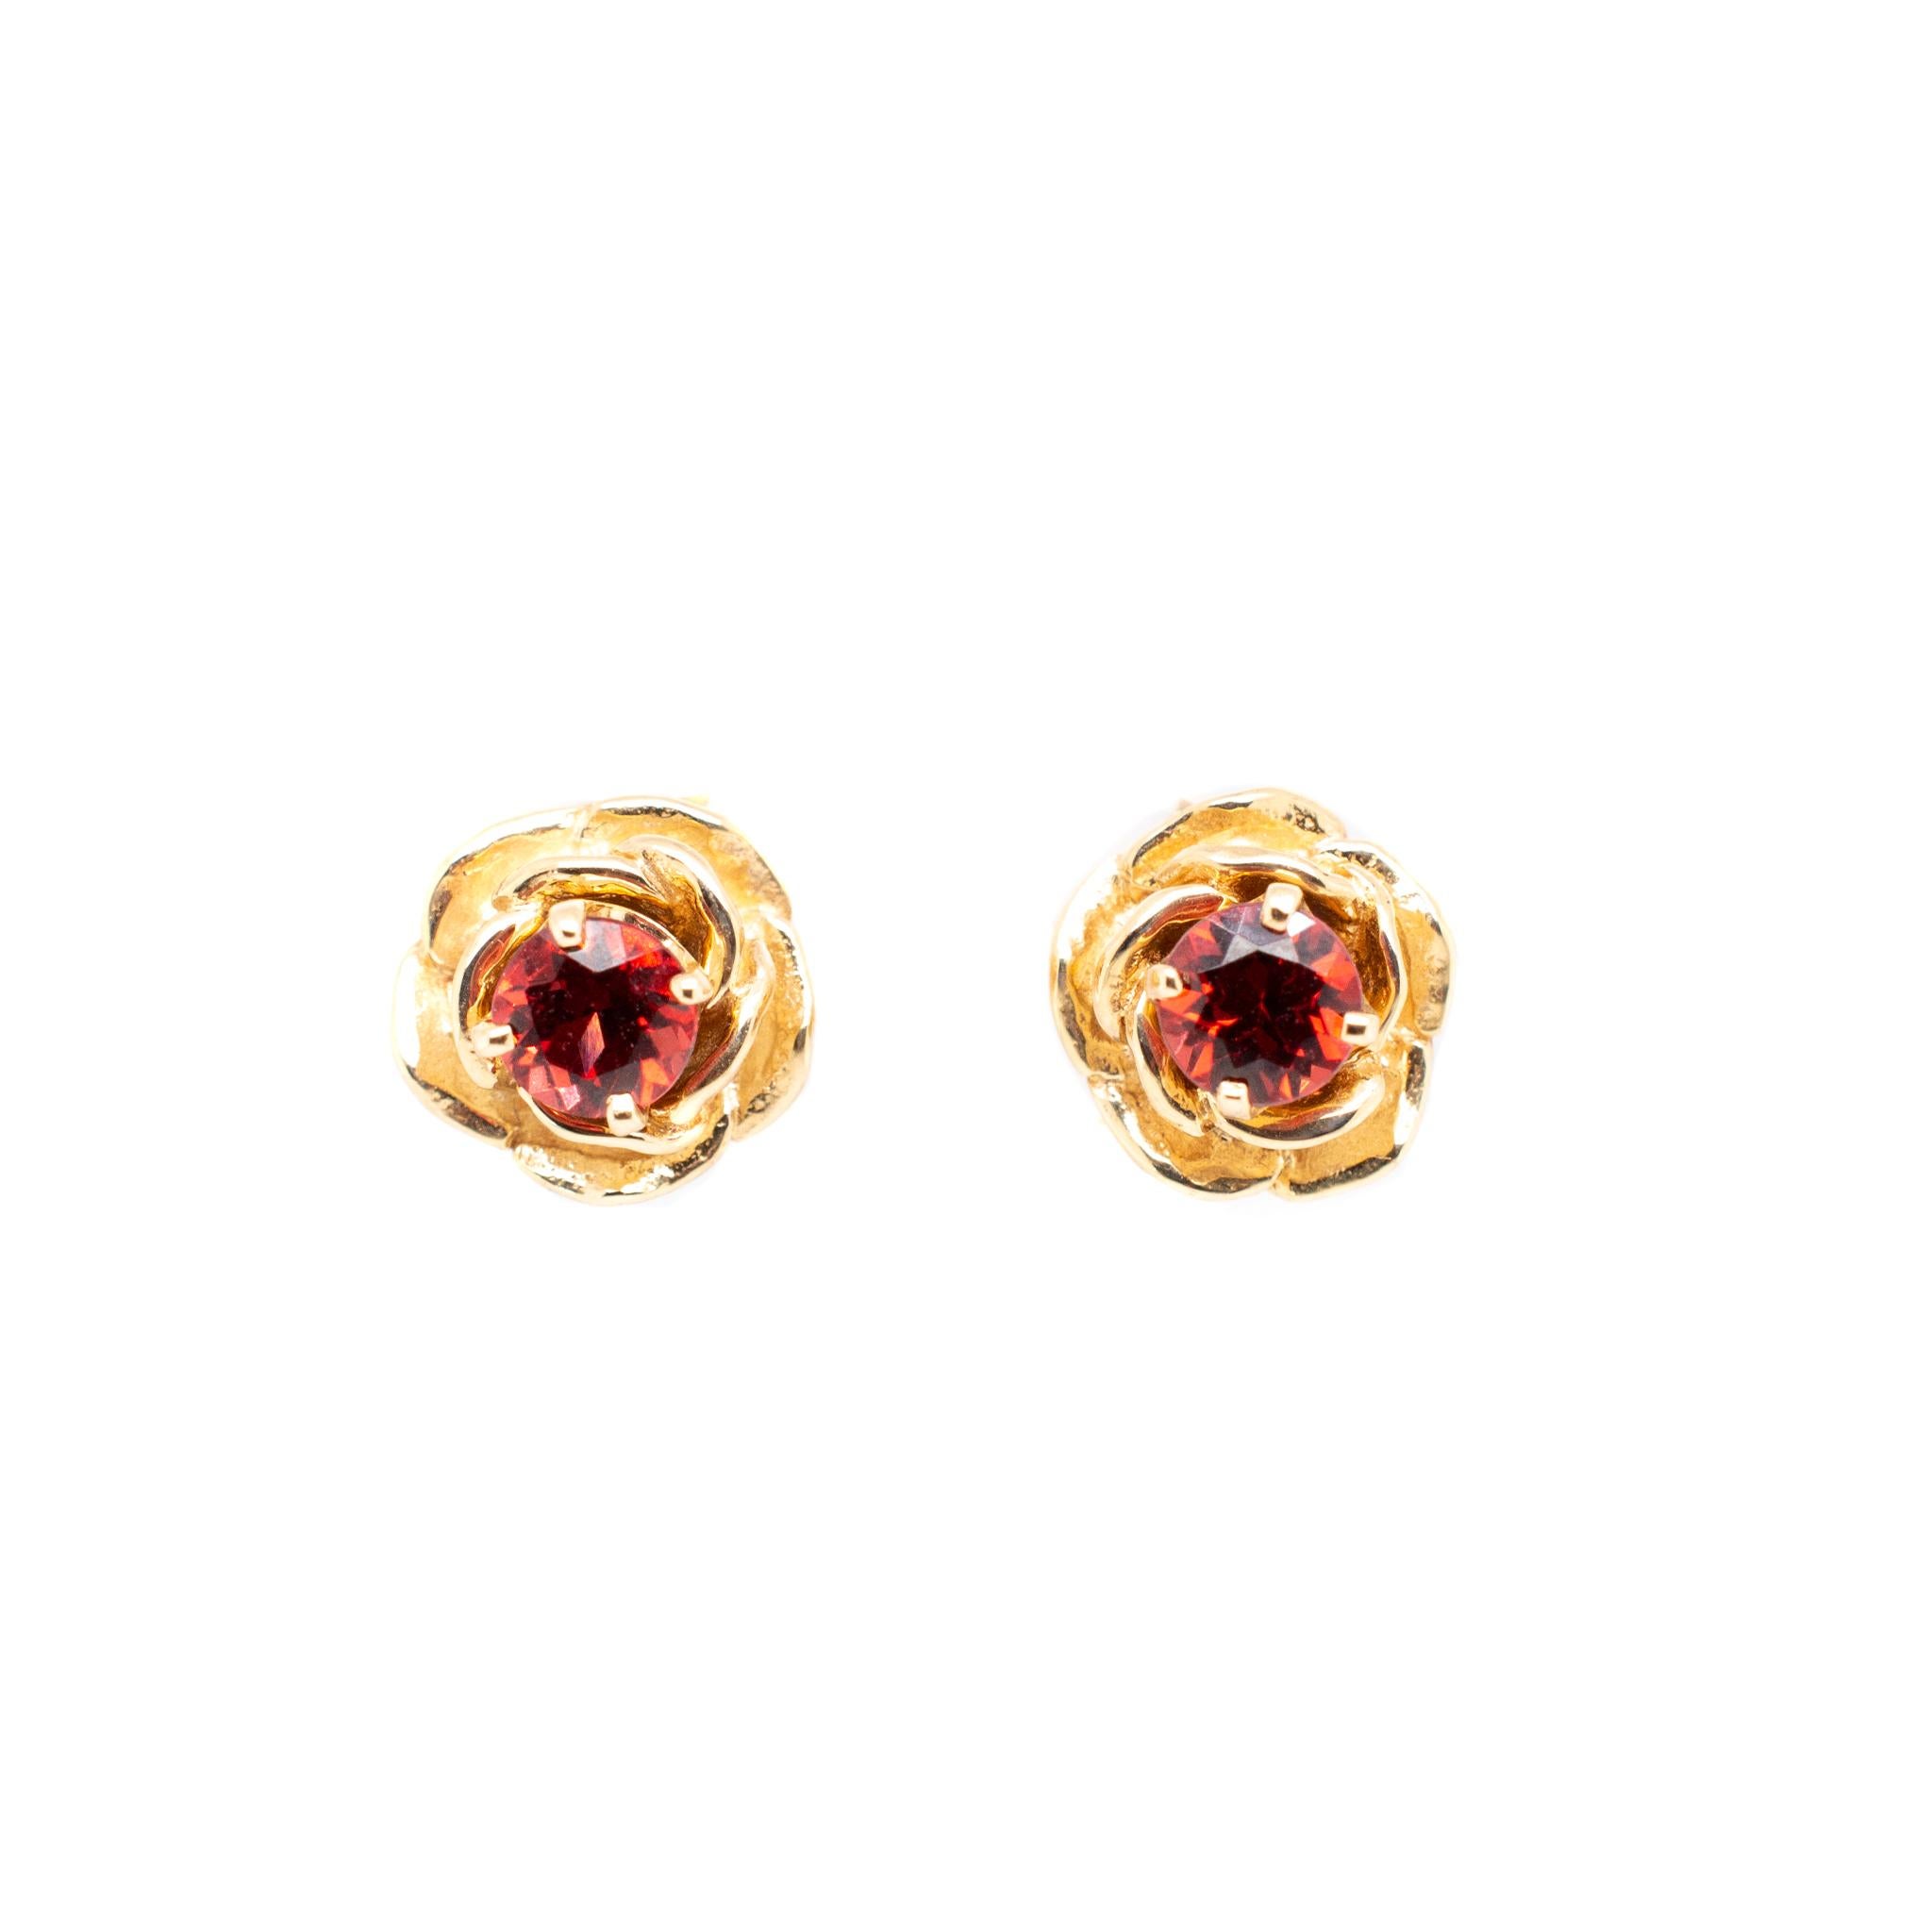 Gender: Ladies

Metal Type: 14K Yellow Gold 

Weight: 5.70 grams

Length: 0.38 Inches

Diameter: 11mm

James Avery 14K yellow gold brushed & polished garnet stud earrings with push backs. Engraved with 